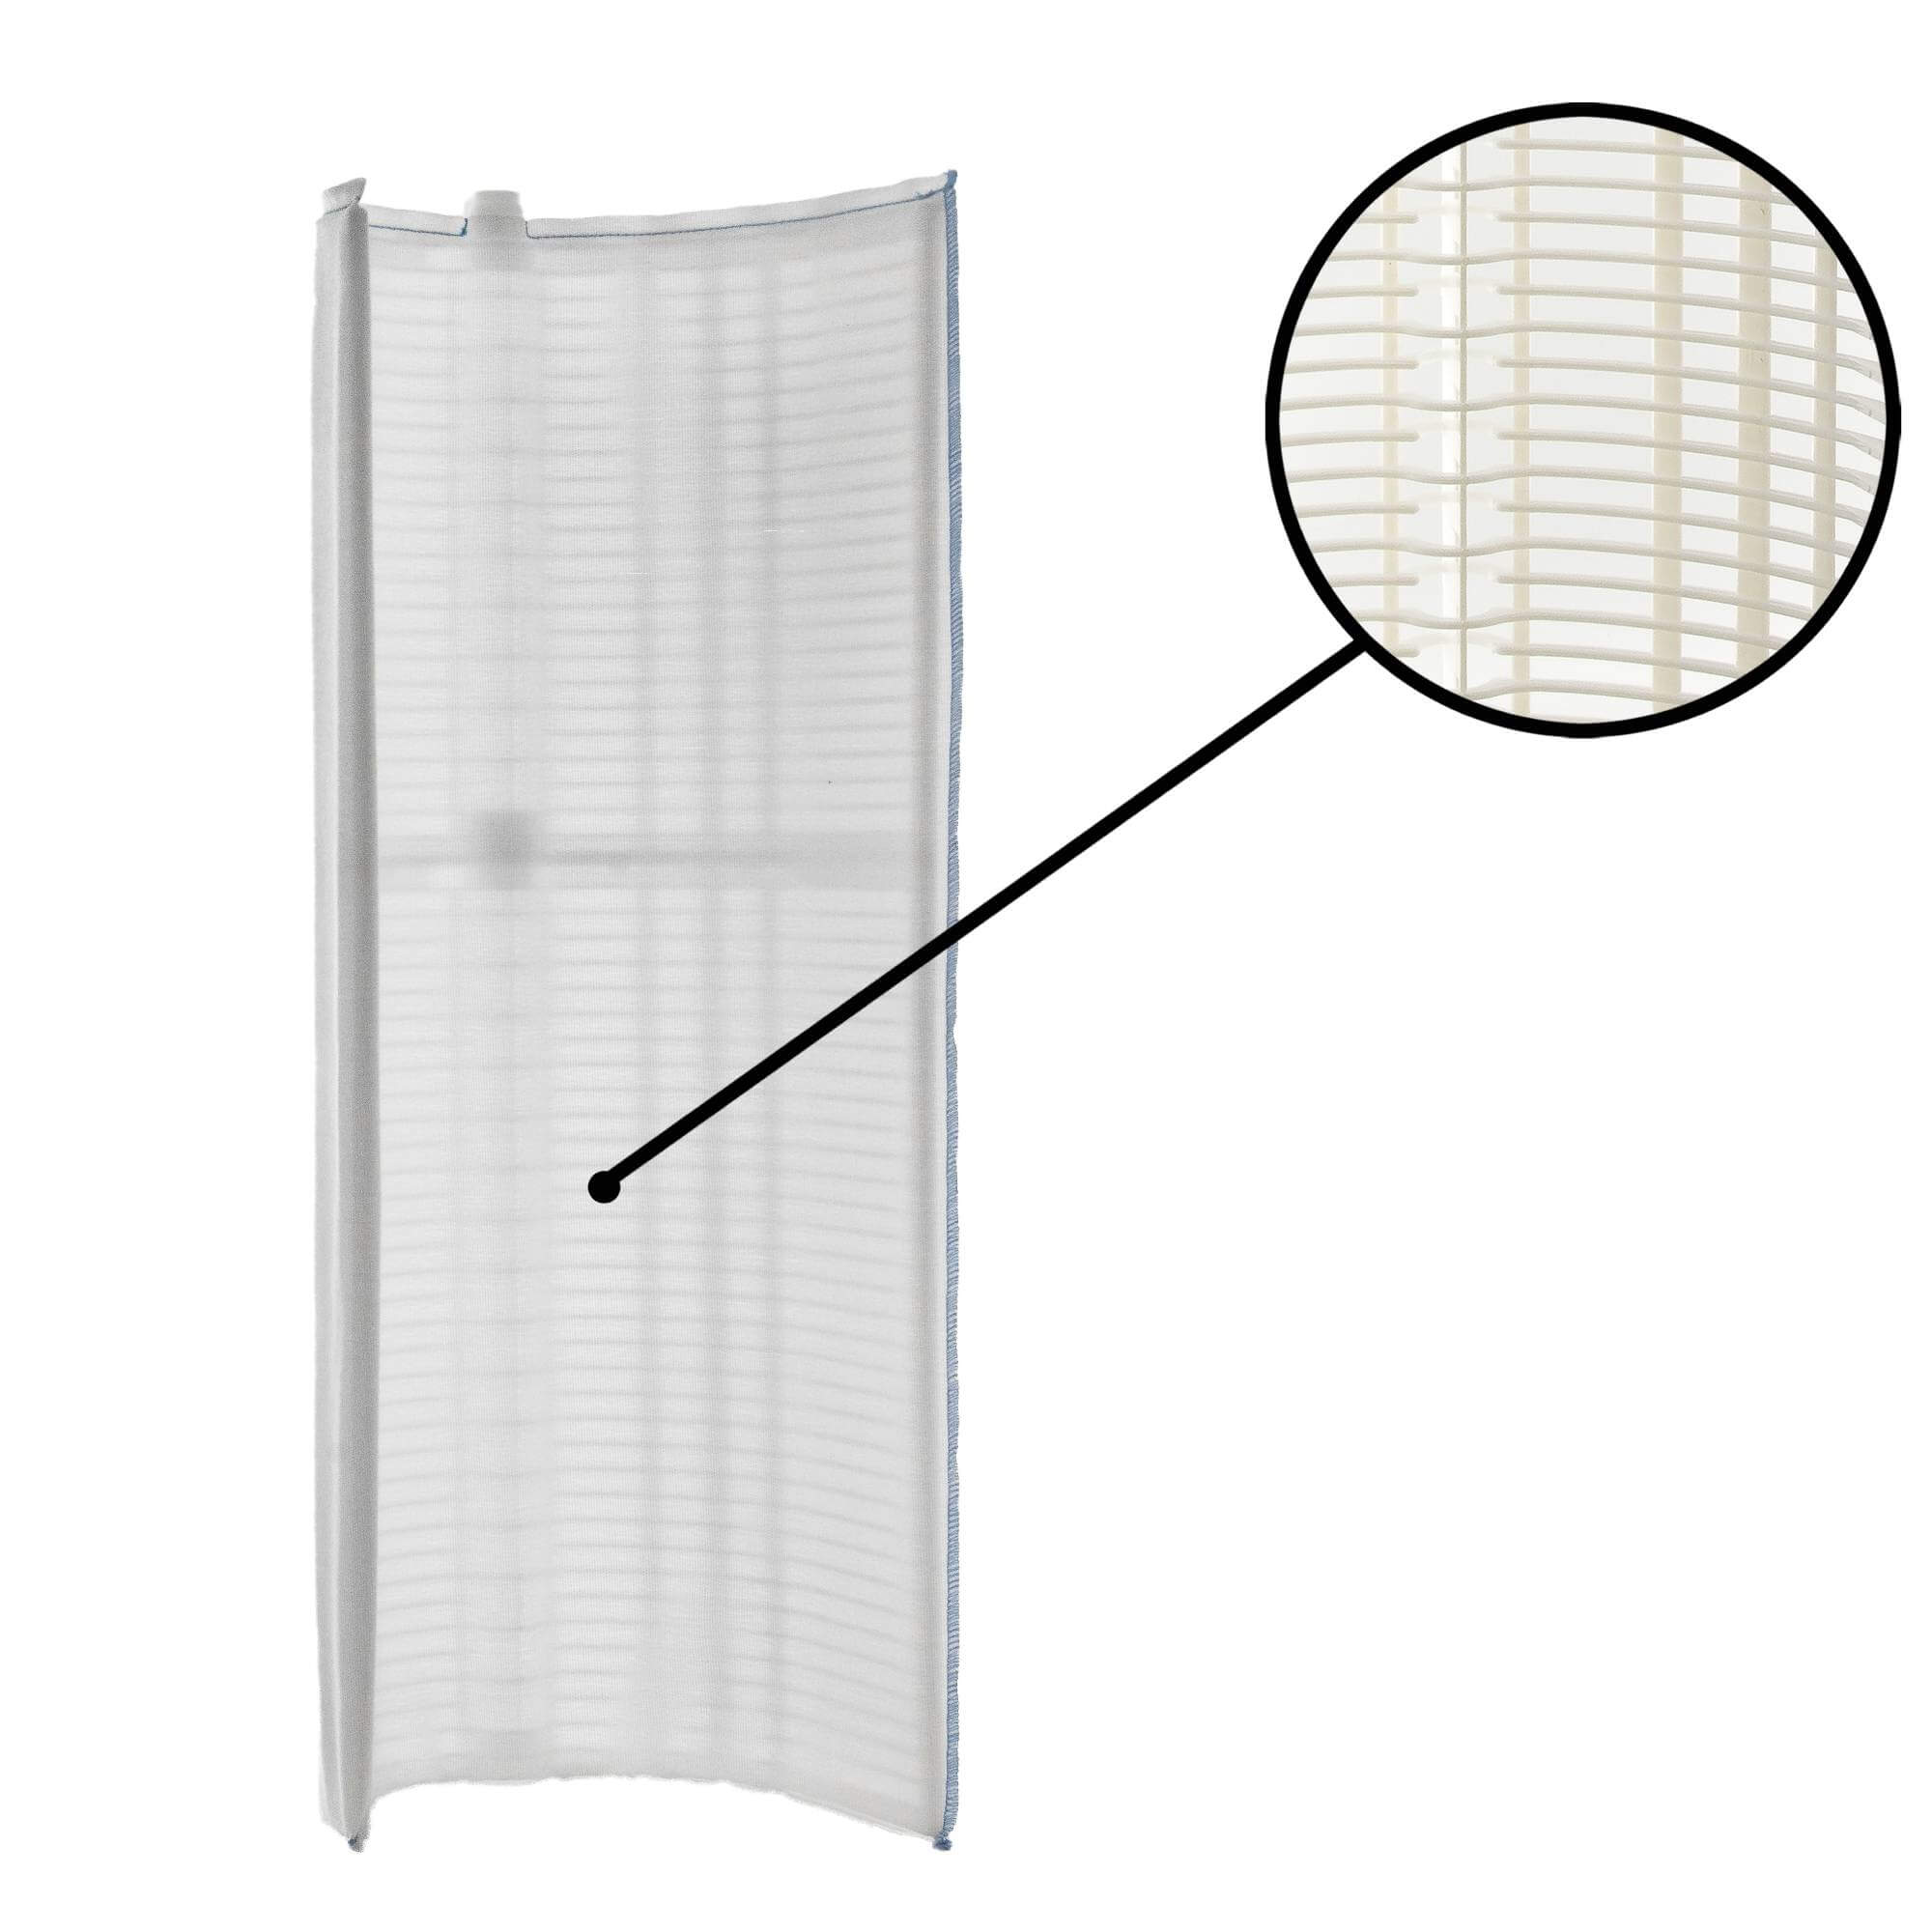 Filters Fast® FF-0131 Replacement for Unicel FS-2005 Pool & Spa Filter Grids